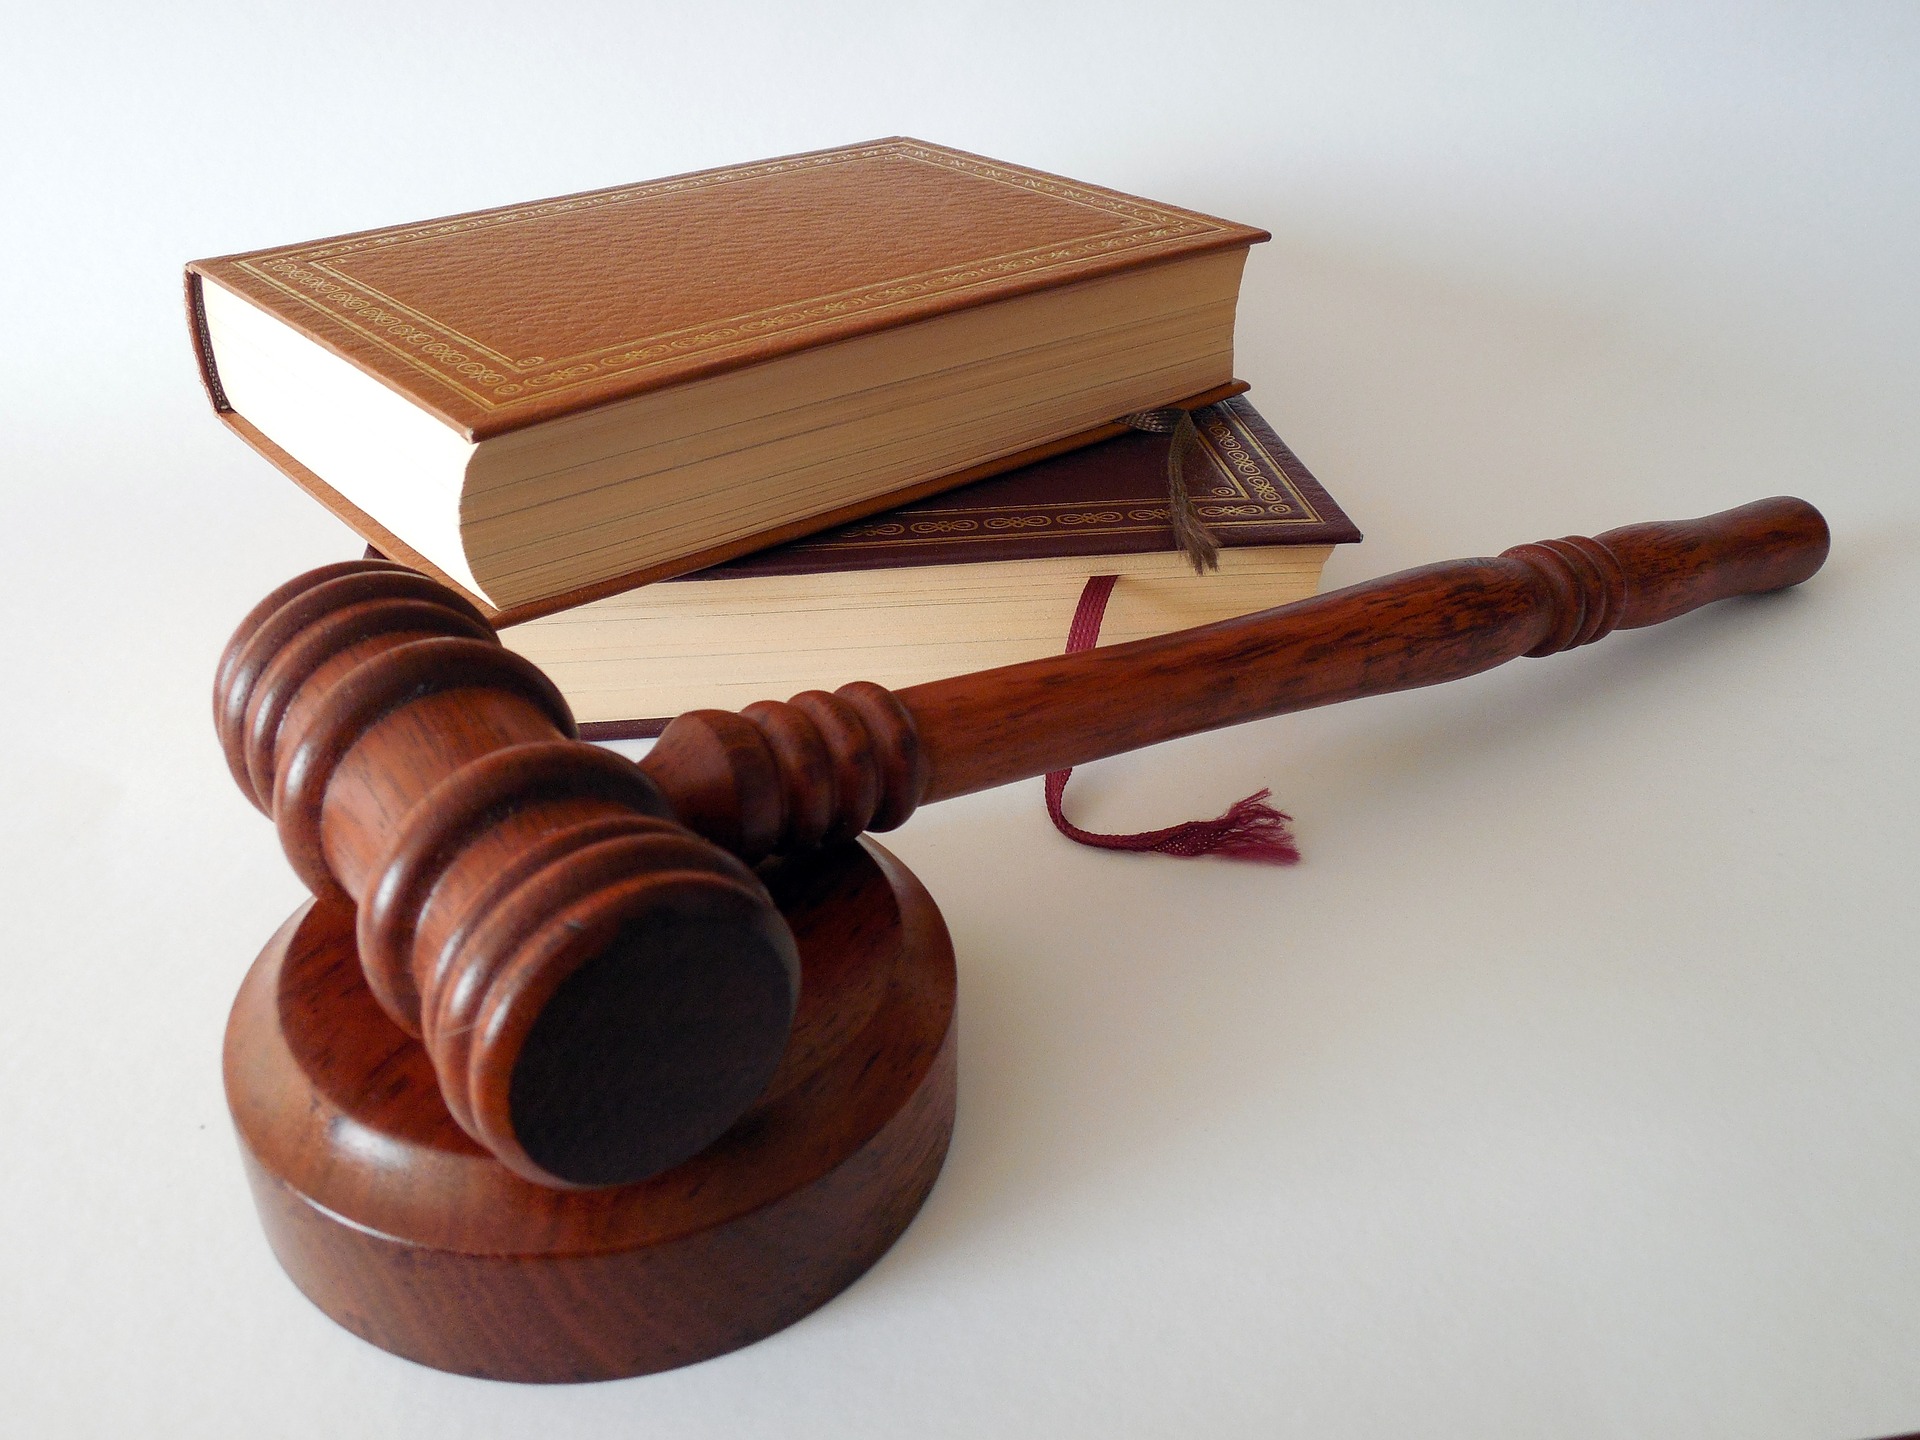 Dubai courts enforce judgements issued by English courts on reciprocity